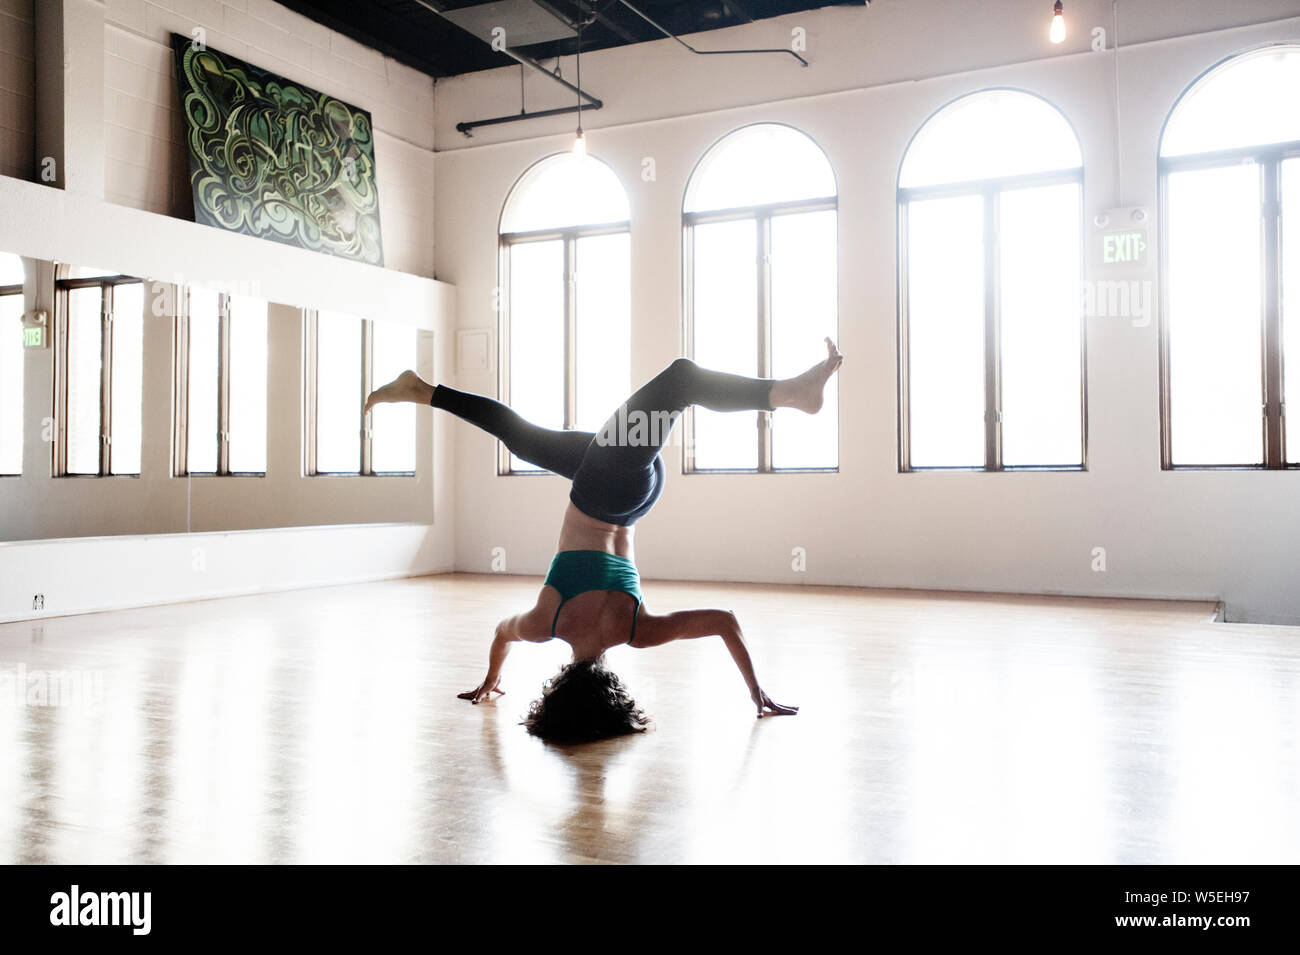 Woman practicing yoga in an extraordinary headstand with a twist. Beautiful window light in an old ballet studio. Stock Photo